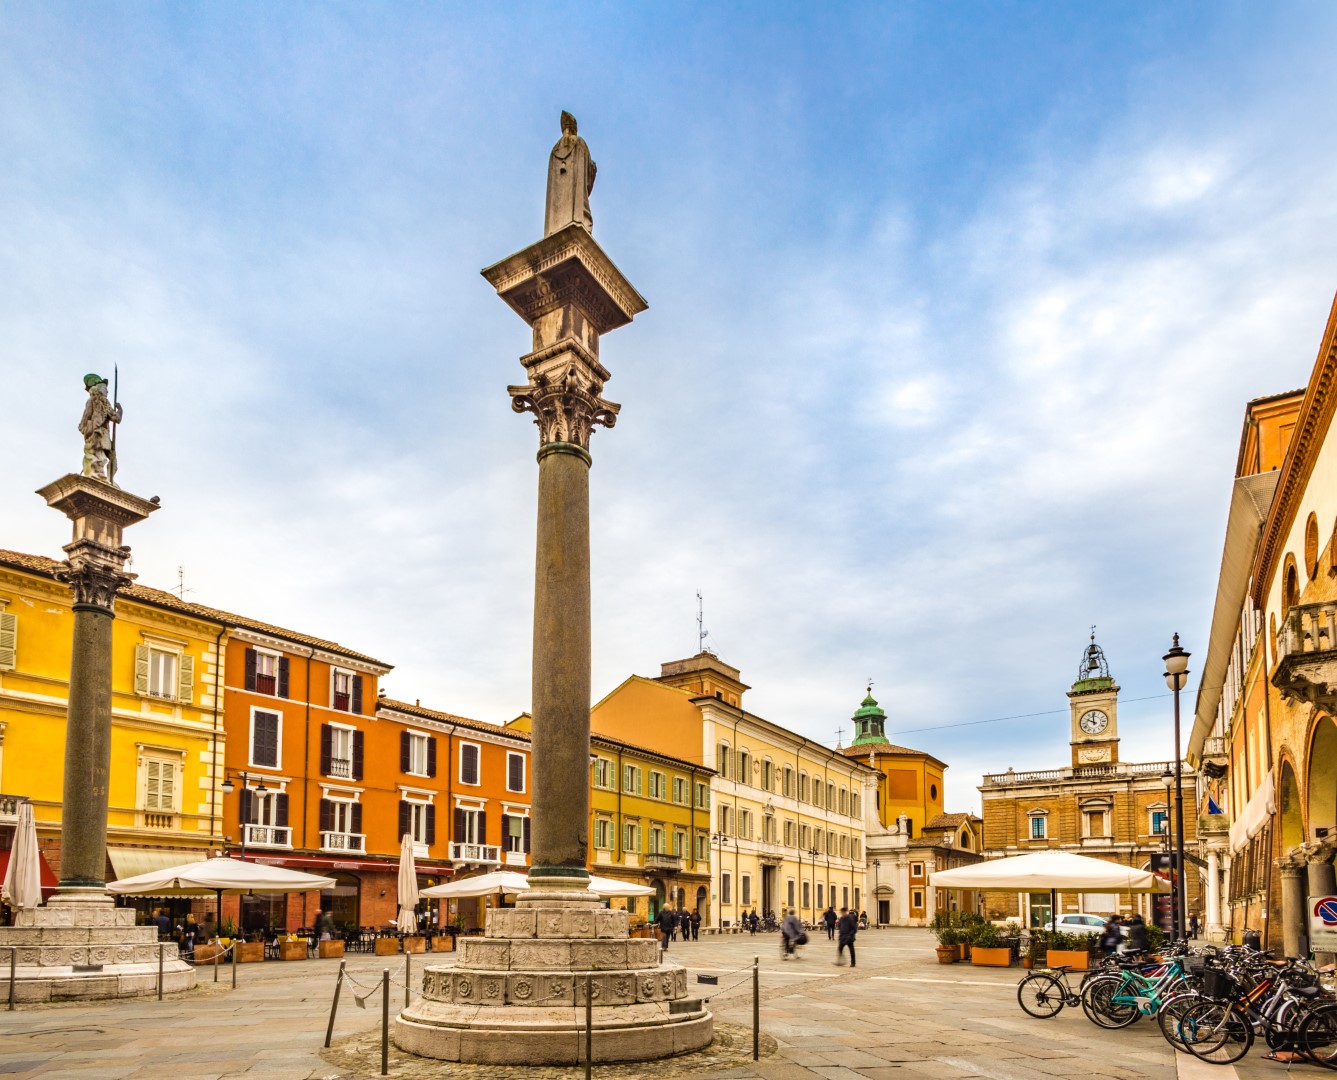 the main square in Ravenna in Italy